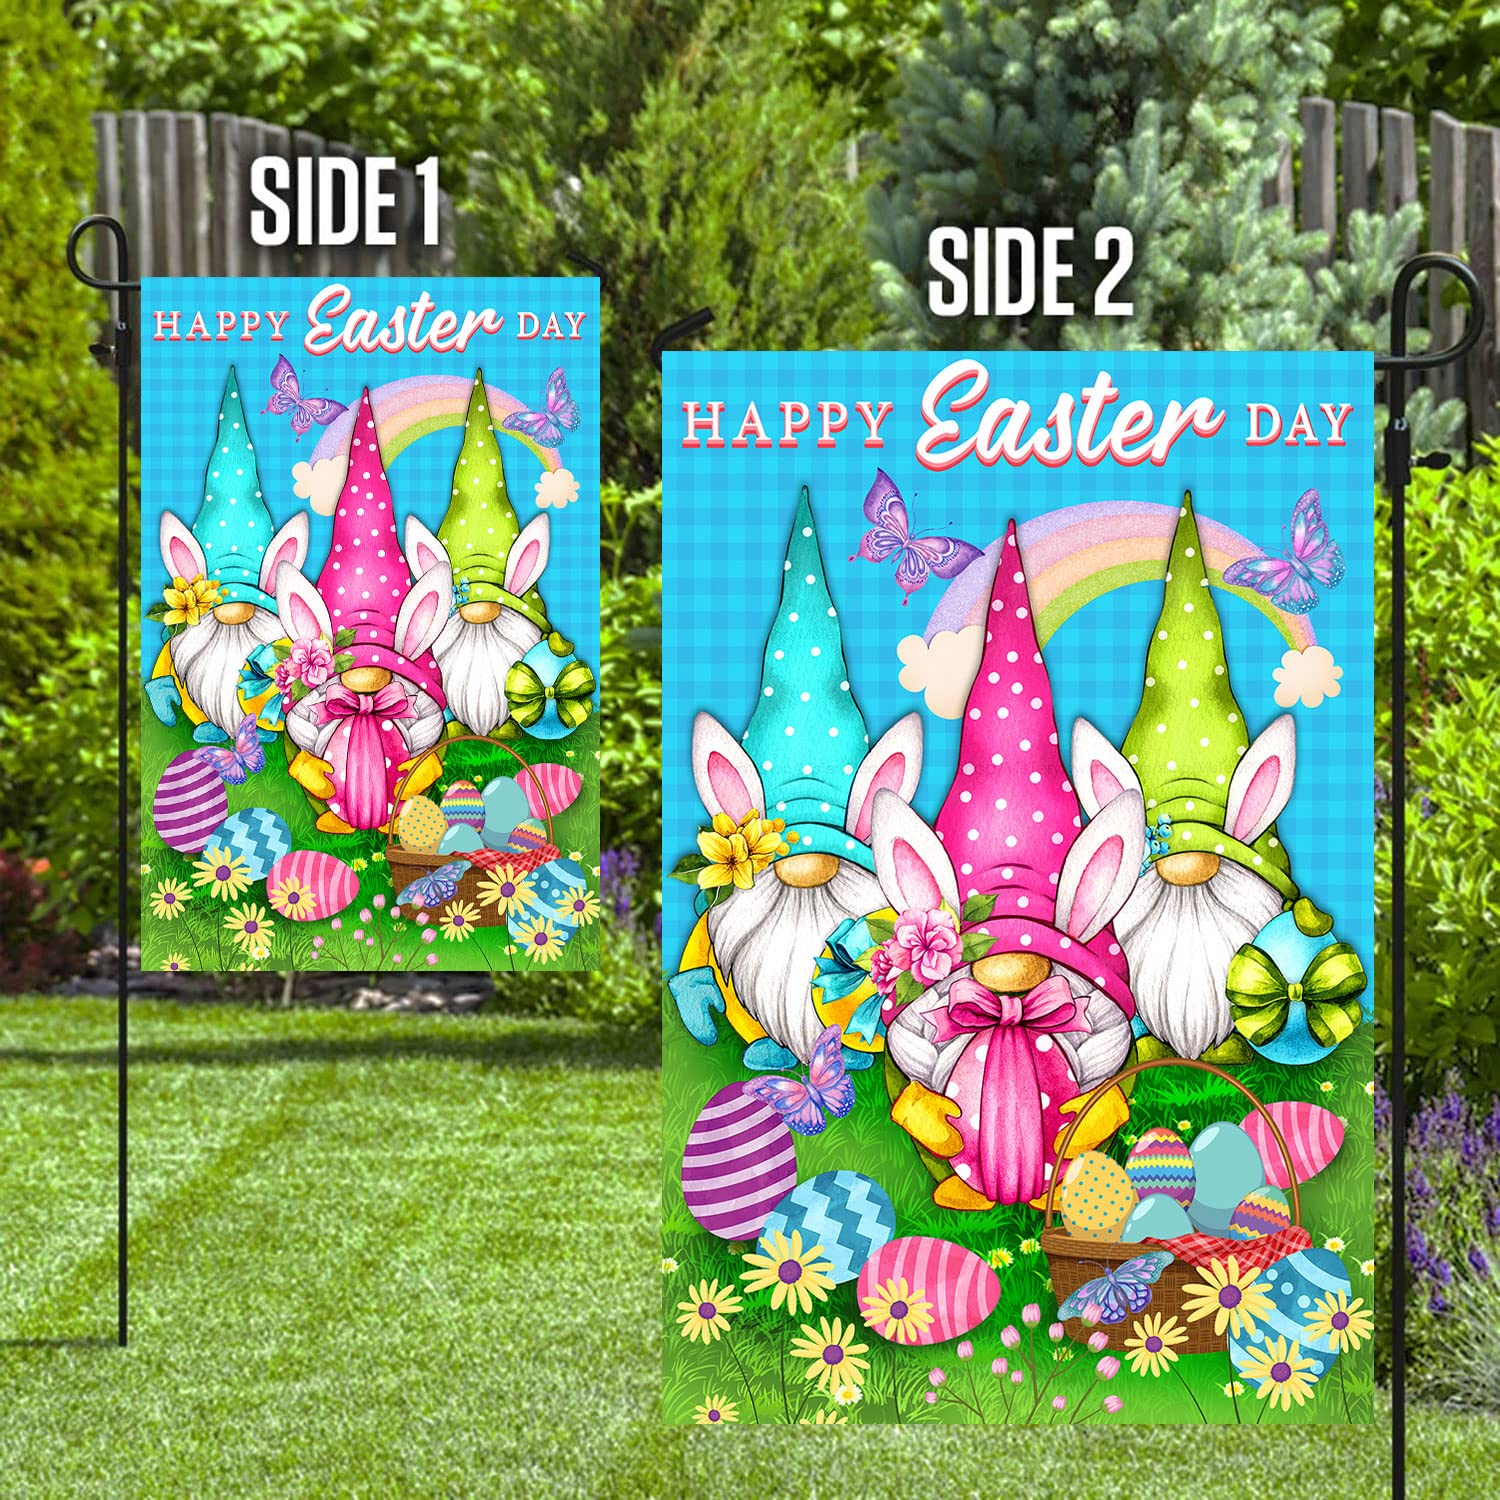 Q-Leo Easter Flag, Set 2 House Flag 28 X 40 And Garden Flag 12 x 18 Double Side, Small Garden Flags Decorations For Outside, Yard Outdoor Decor With 3 Gnones and Happy Easter day Signs